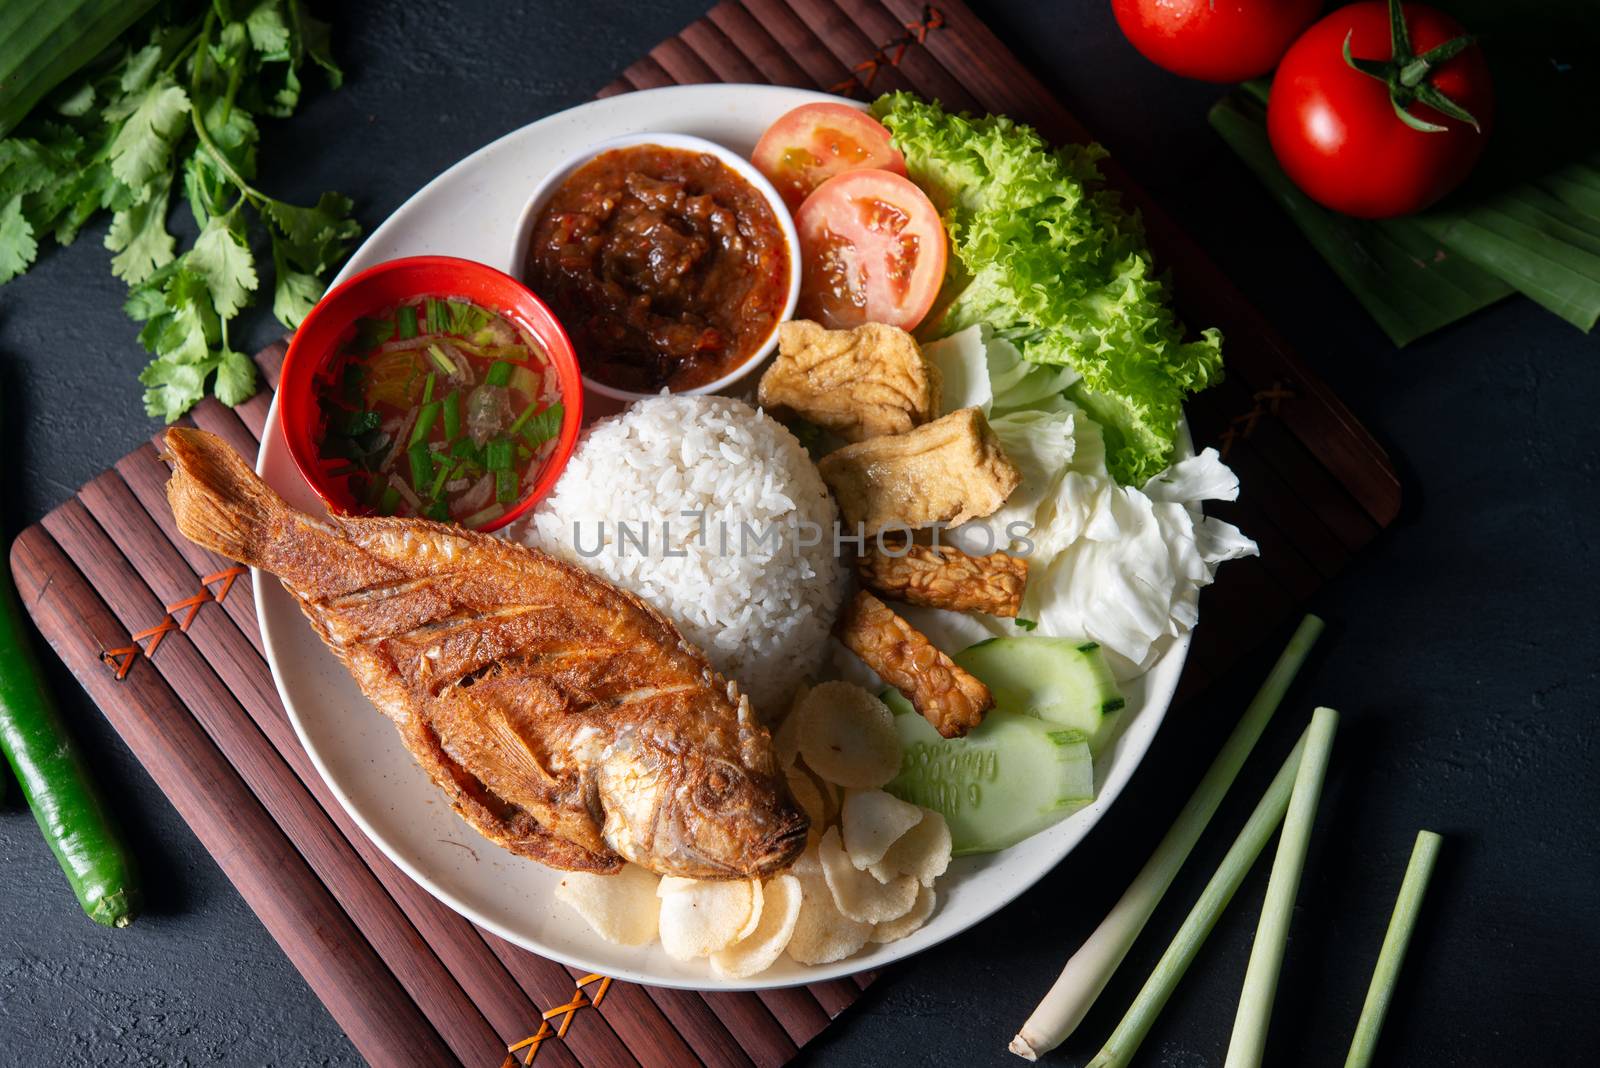 Fried tilapia fish and rice by szefei